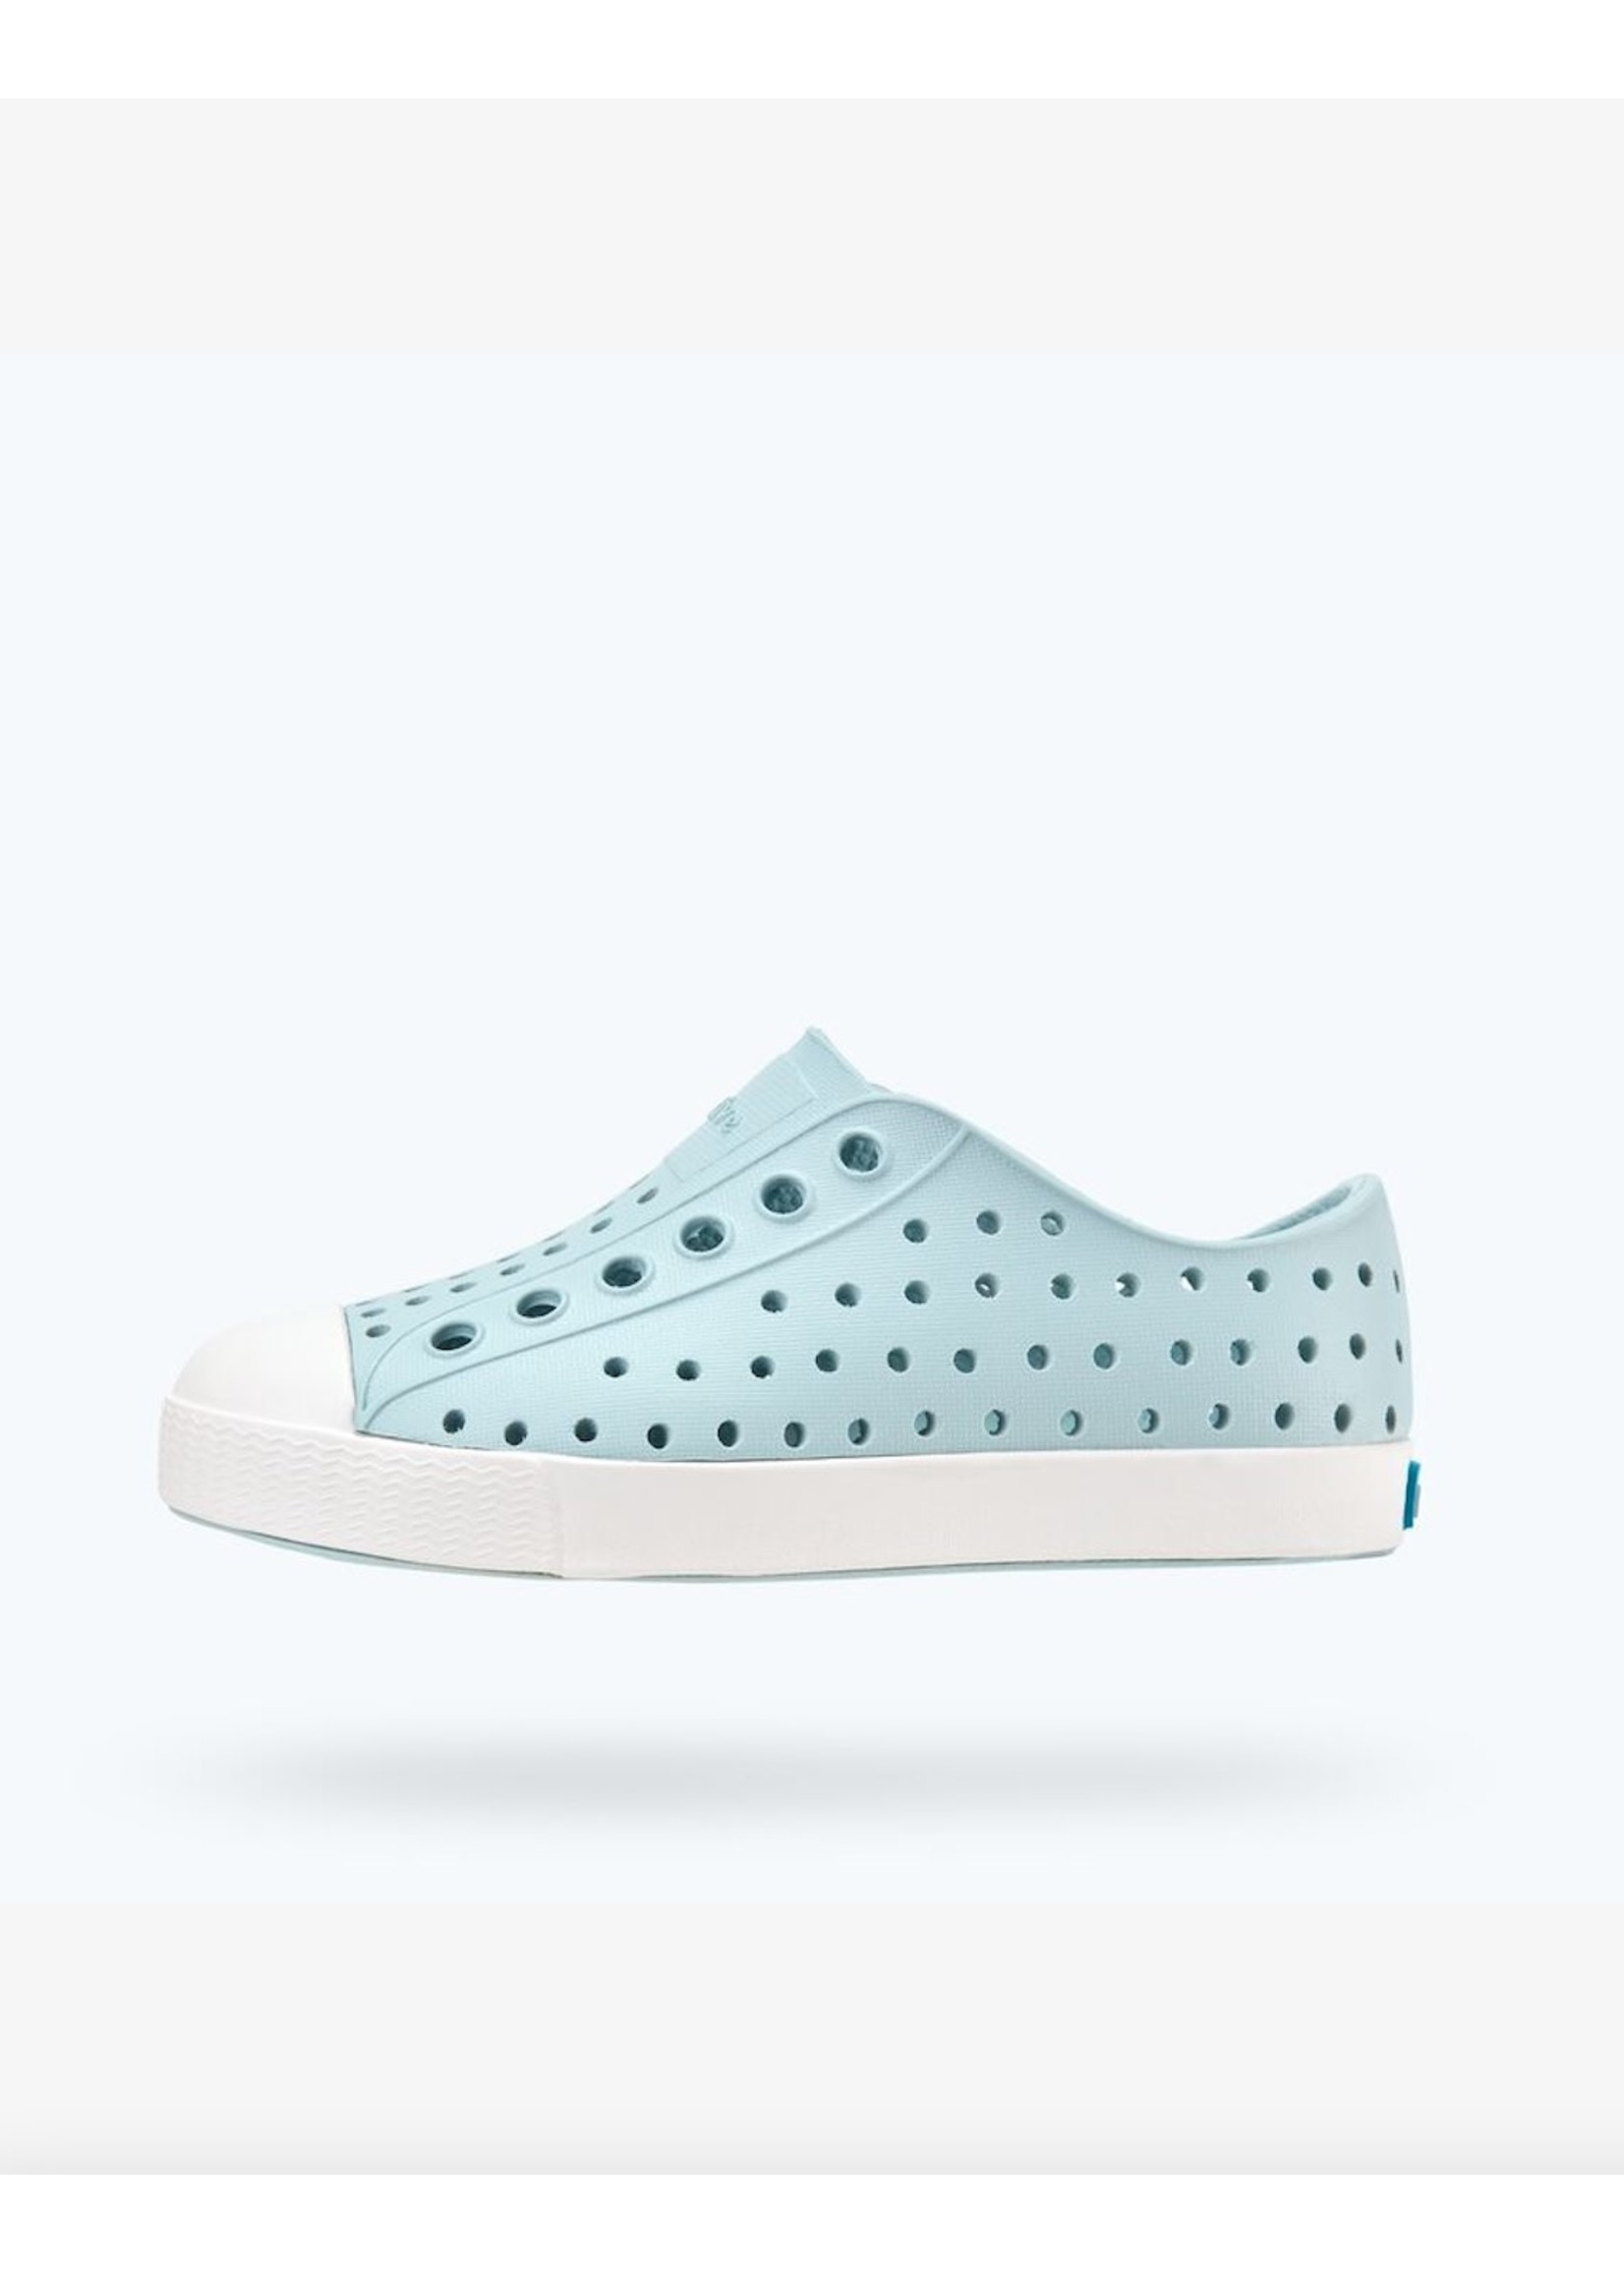 Native Shoes Native Shoes, Jefferson Youth / Junior in  in Skip Blue/ Shell White